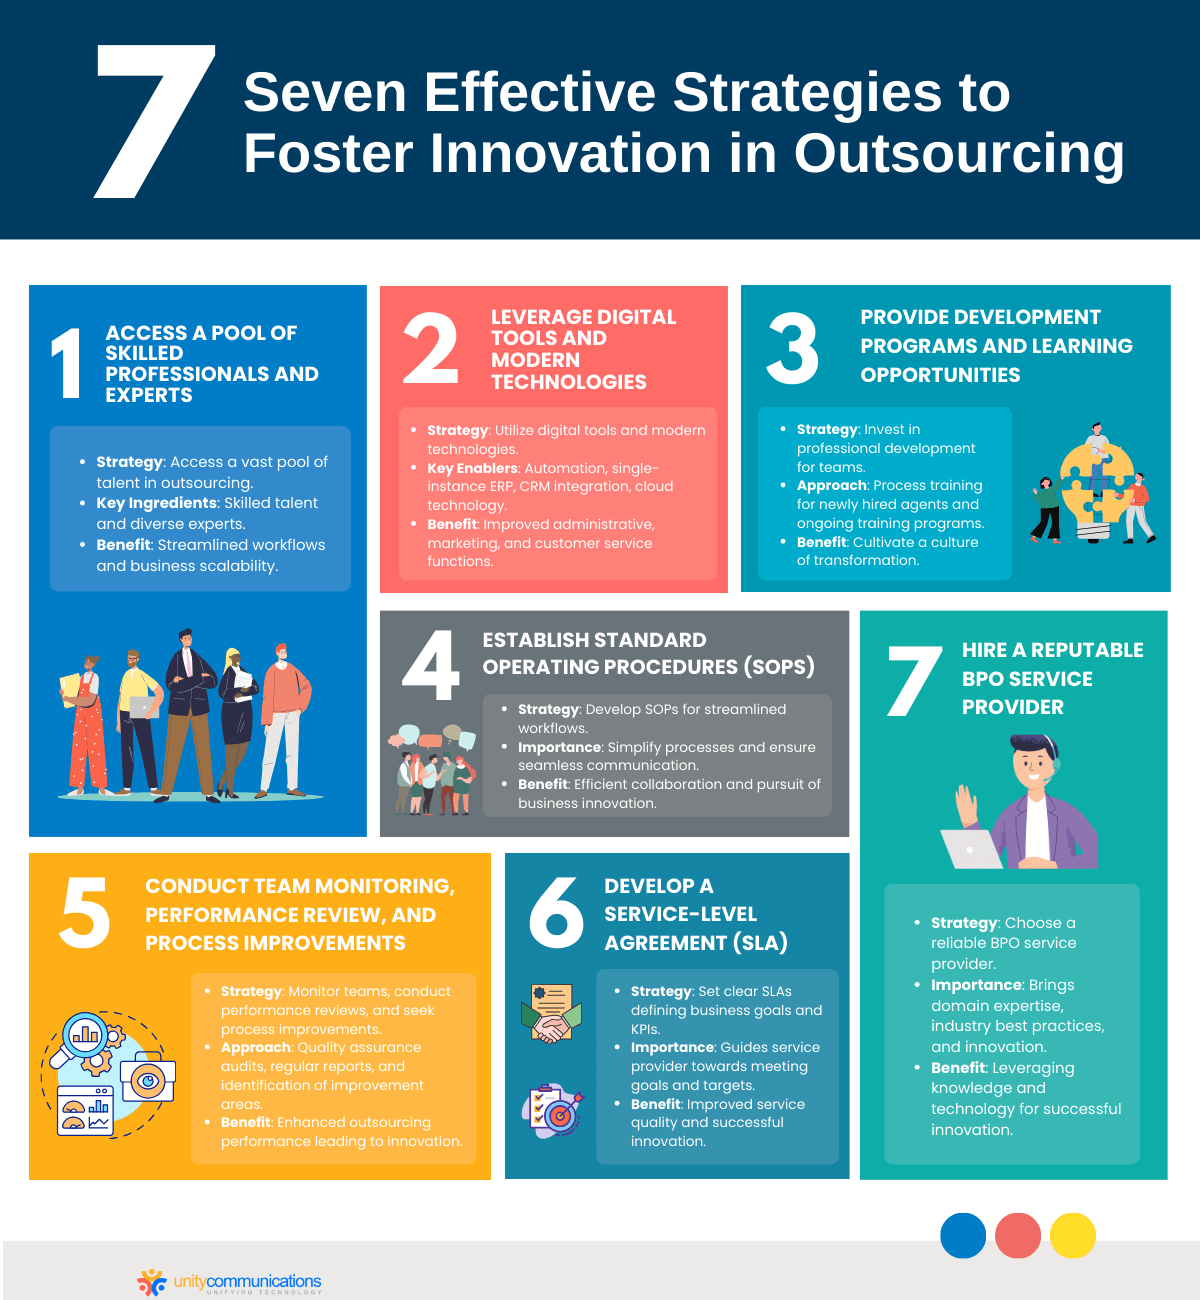 Seven Effective Strategies to Foster Innovation in Outsourcing - Infographic